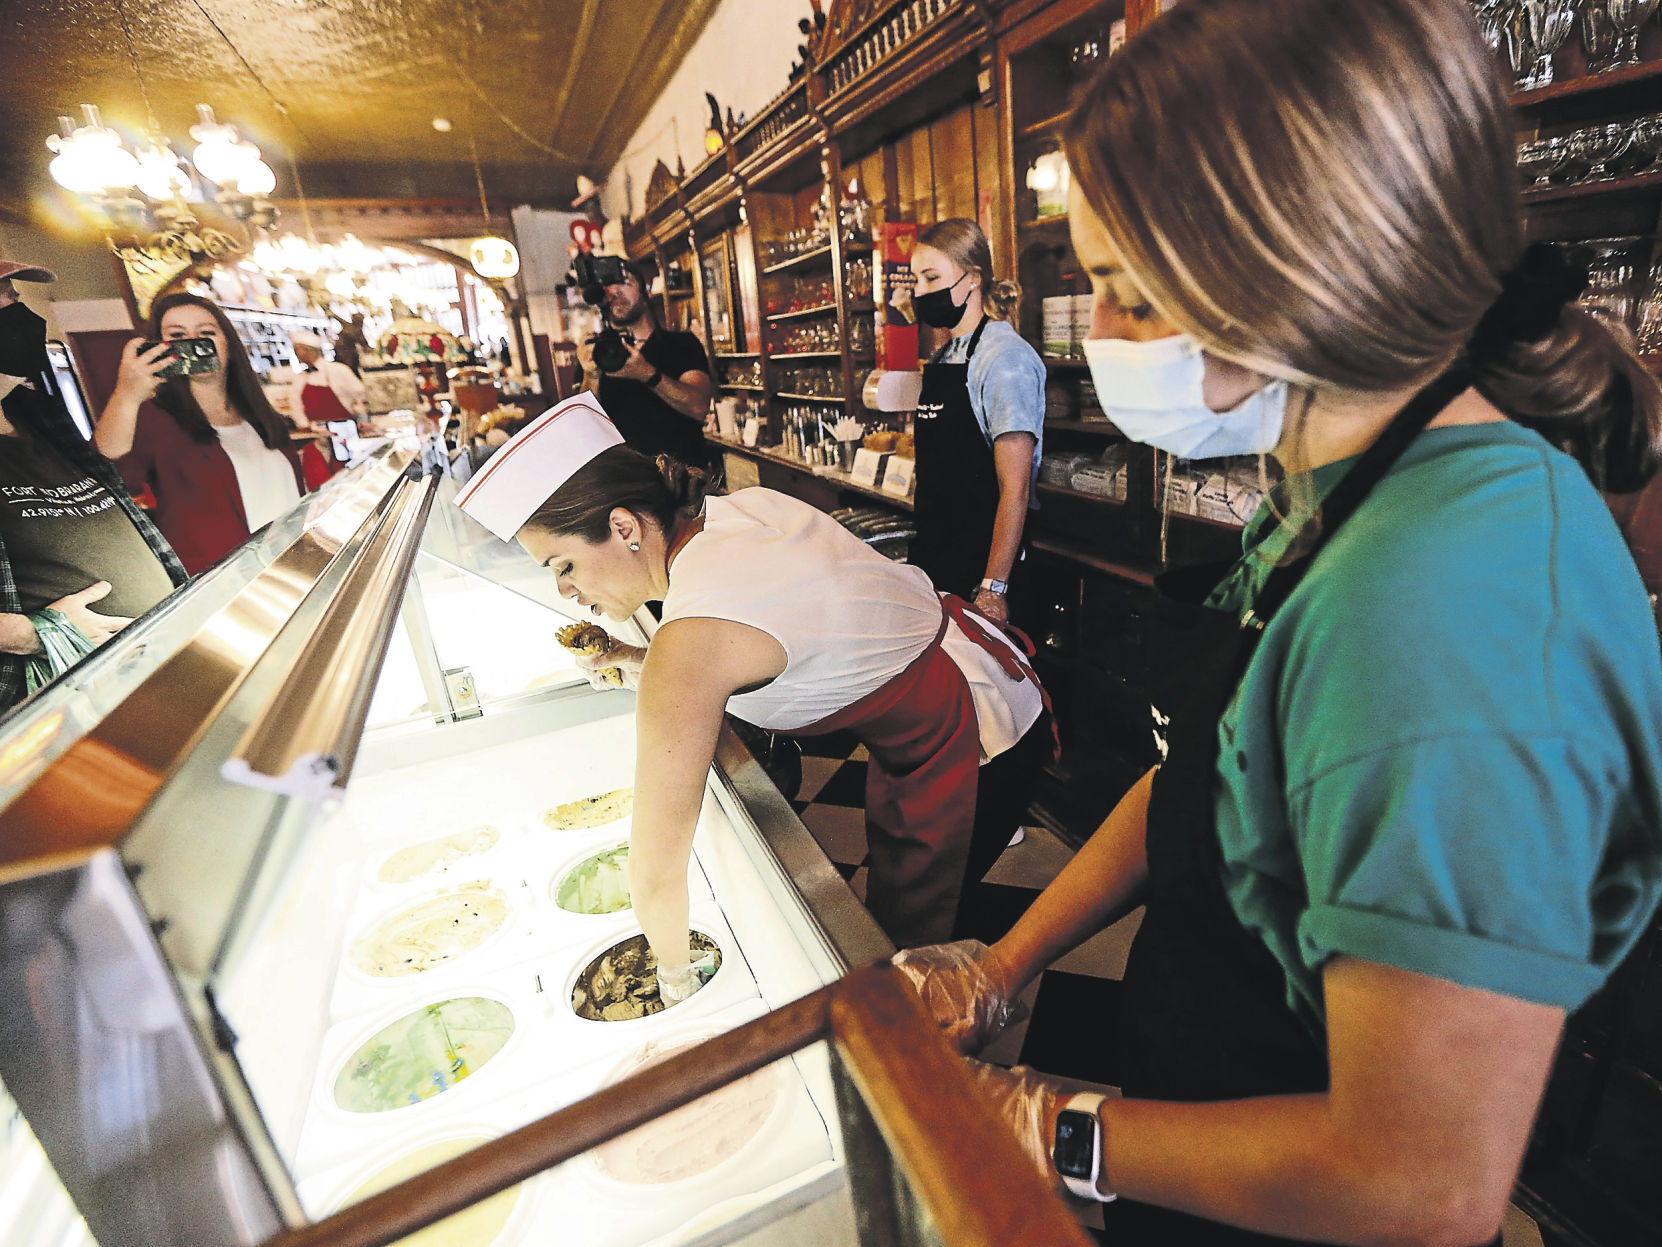 Ice cream is scooped at The American Old Fashioned Ice Cream Parlor in Galena, Ill.    PHOTO CREDIT: Dave Kettering